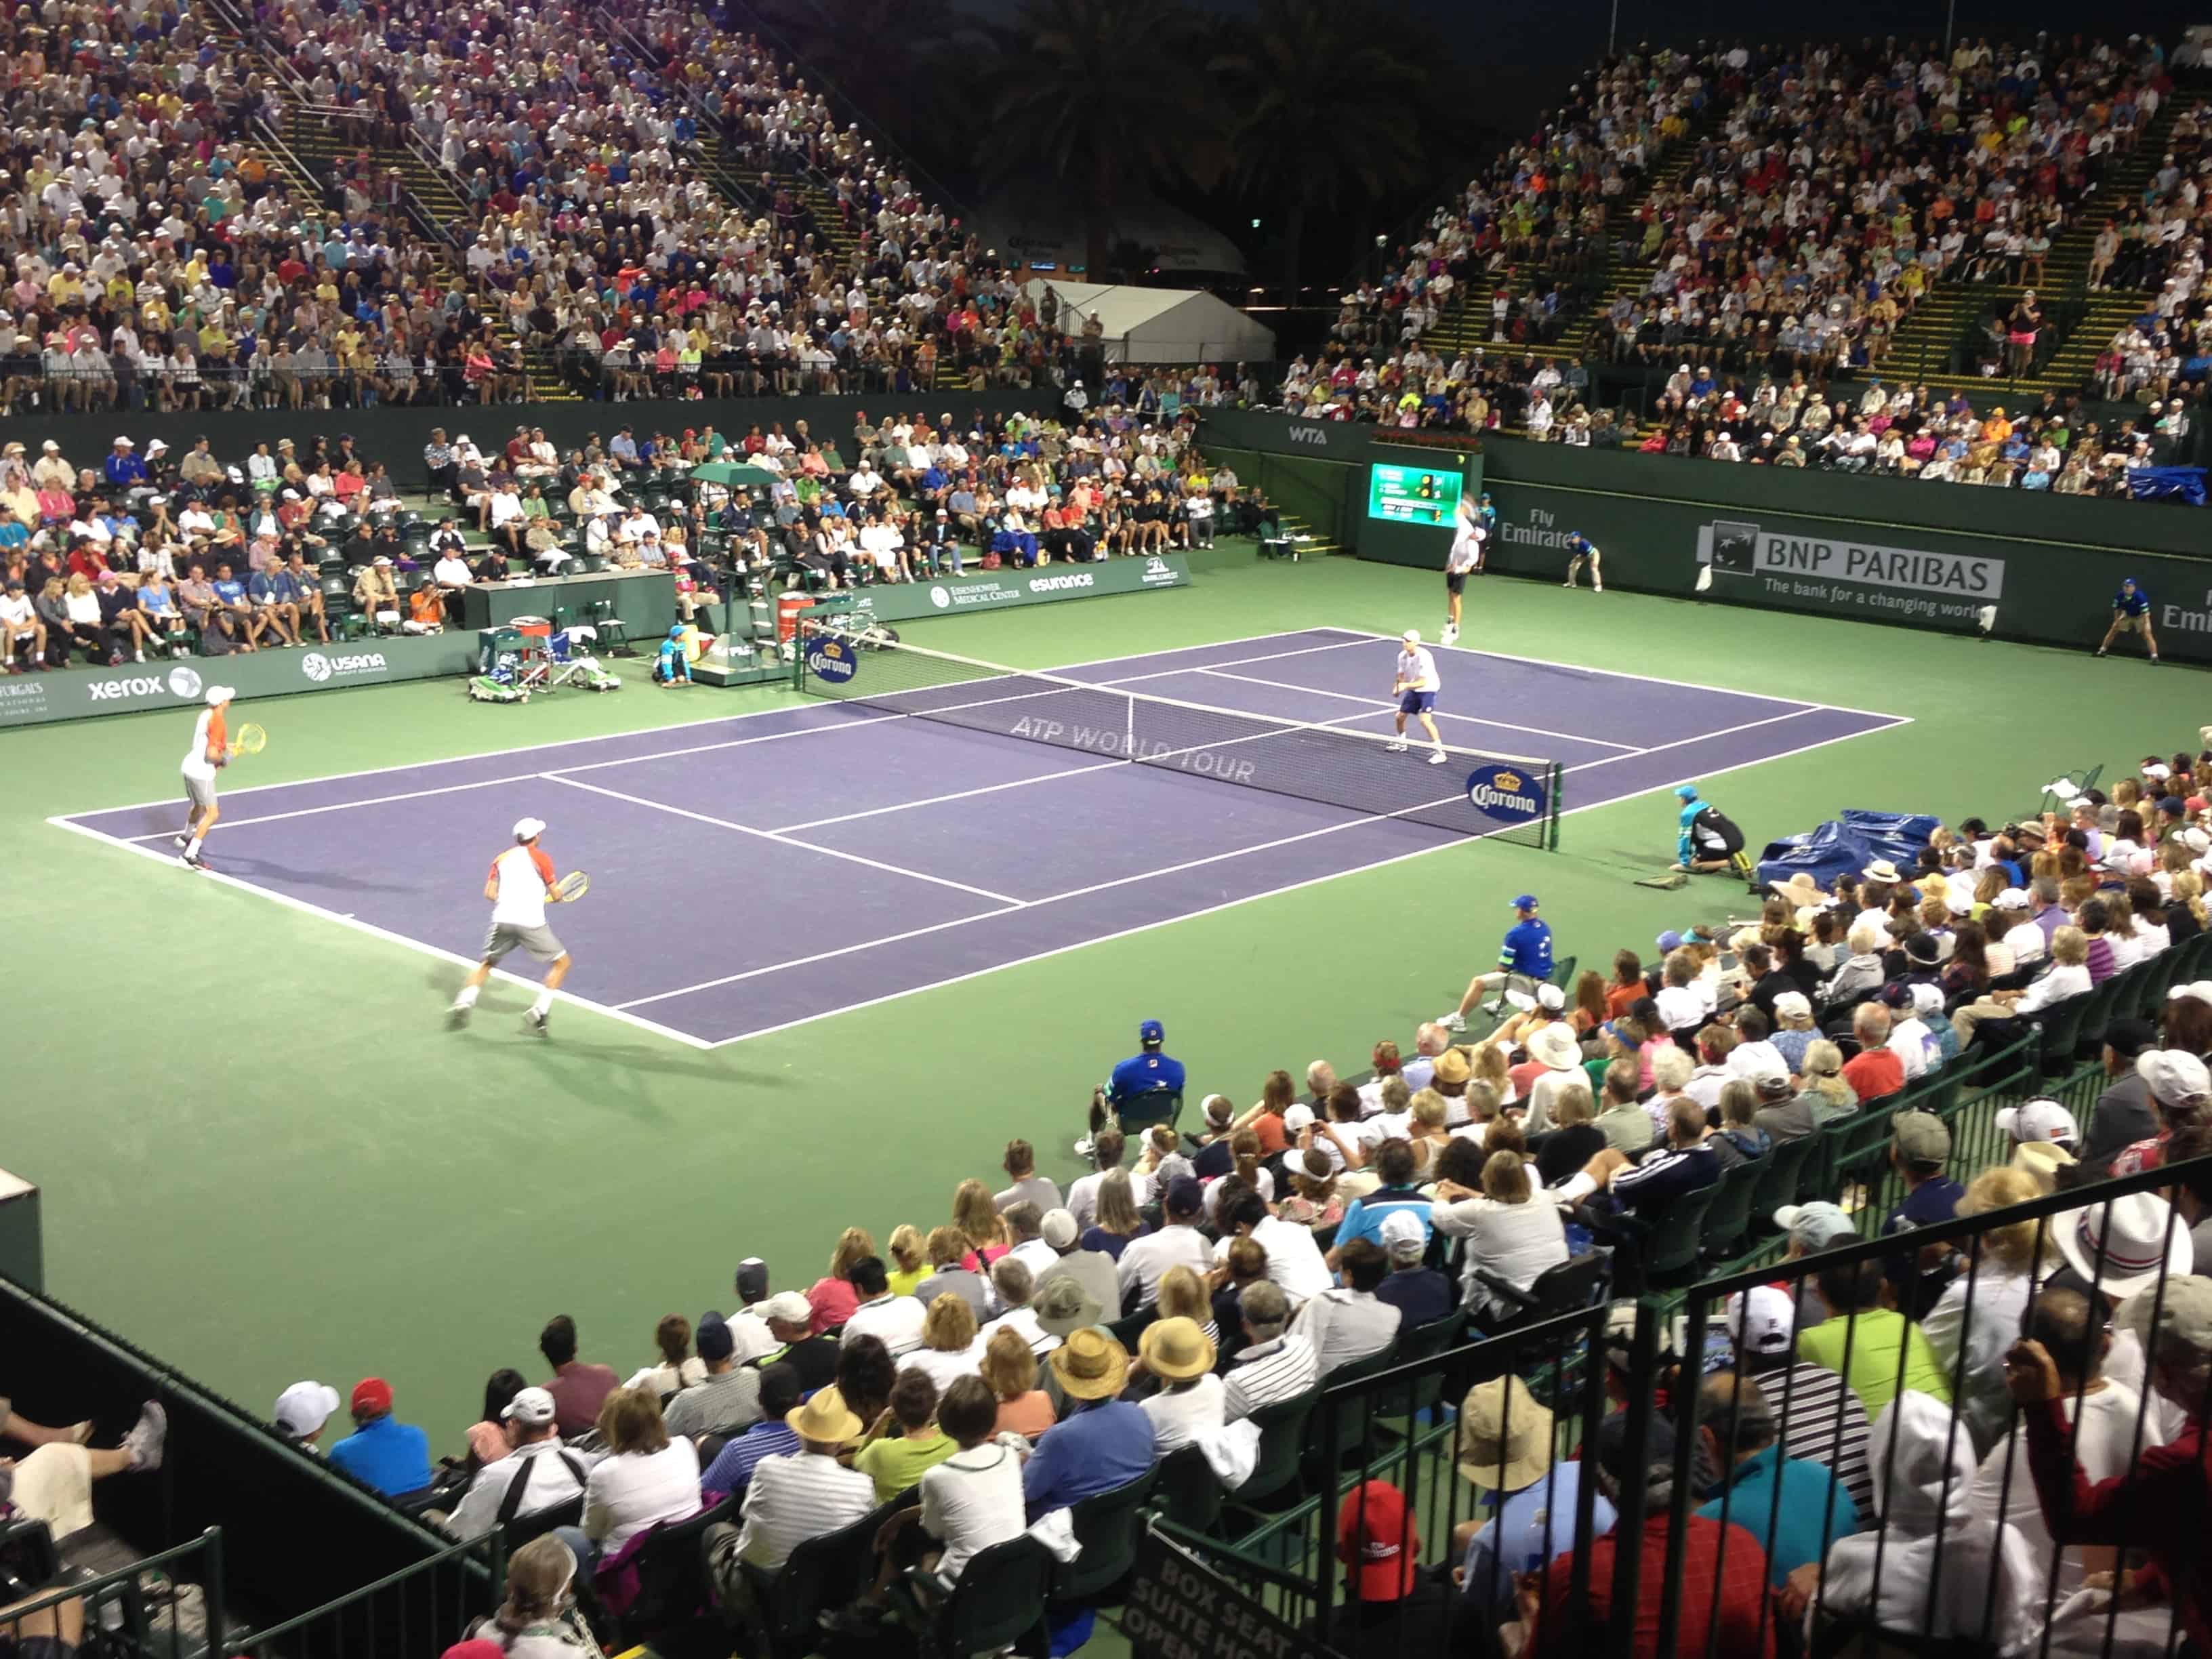 Look for a brand new 8-thousand seat Stadium-2 at the 2014 BNP Paribas Open